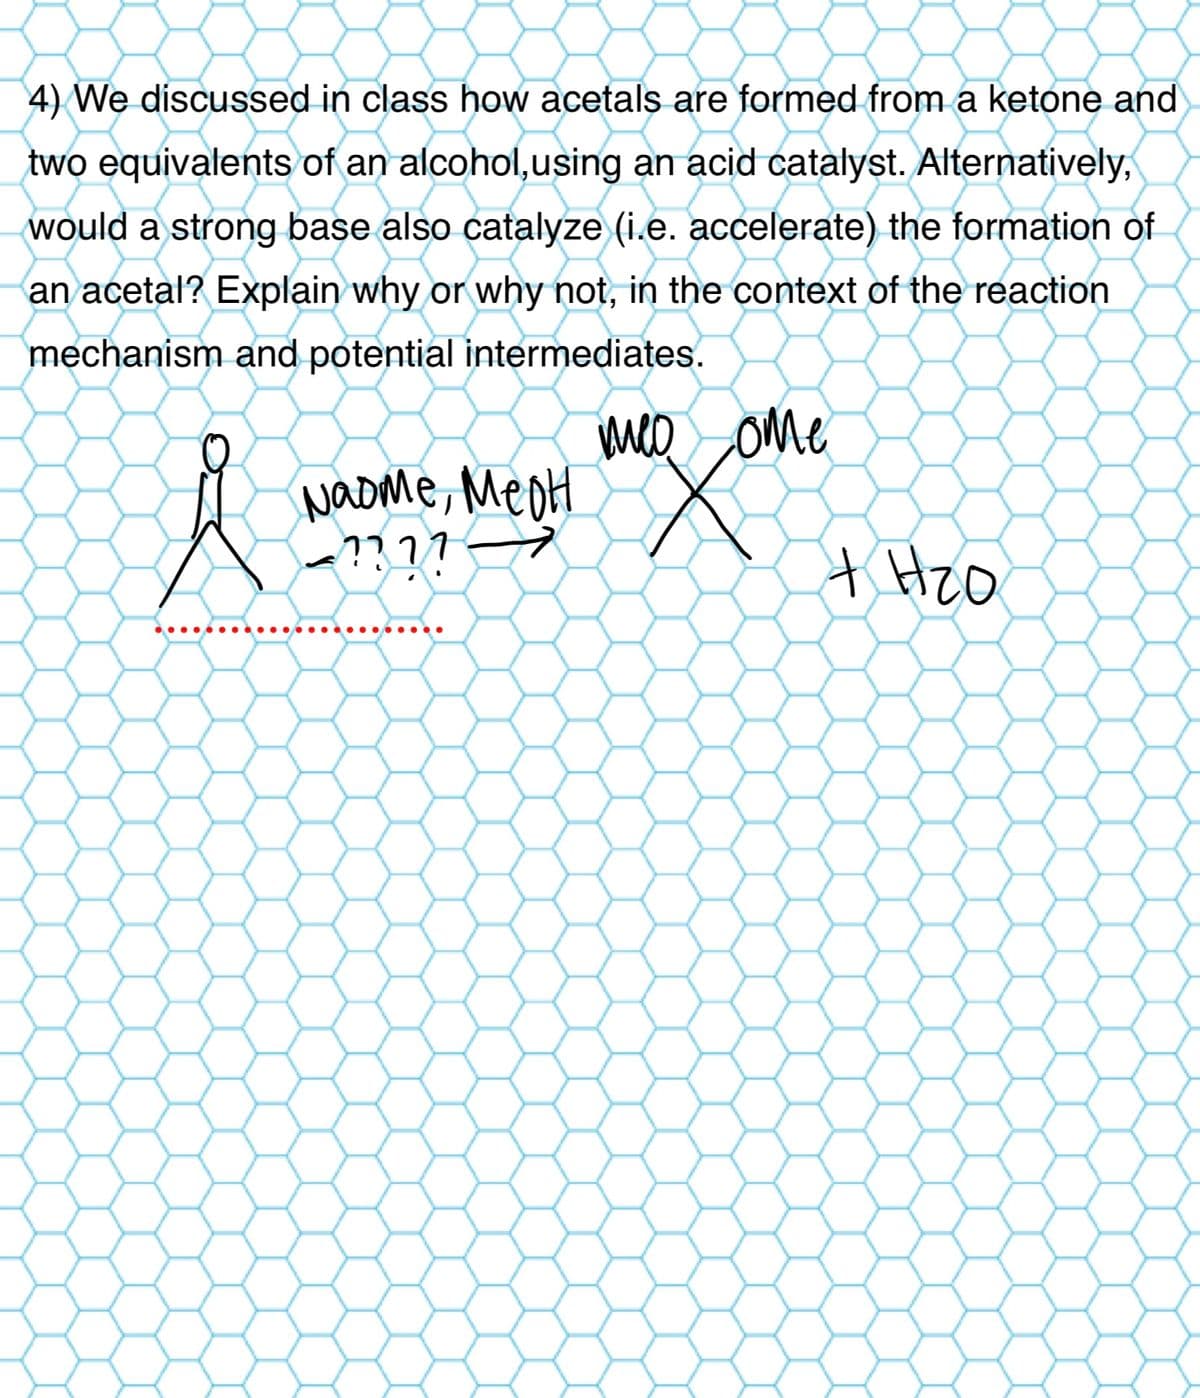 4) We discussed in class how acetals are formed from a ketone and
two equivalents of an alcohol, using an acid catalyst. Alternatively,
would a strong base also catalyze (i.e. accelerate) the formation of
an acetal? Explain why or why not, in the context of the reaction
mechanism and potential intermediates.
Naome, MeoH
าาาา
←
meo ome
+ Hzo